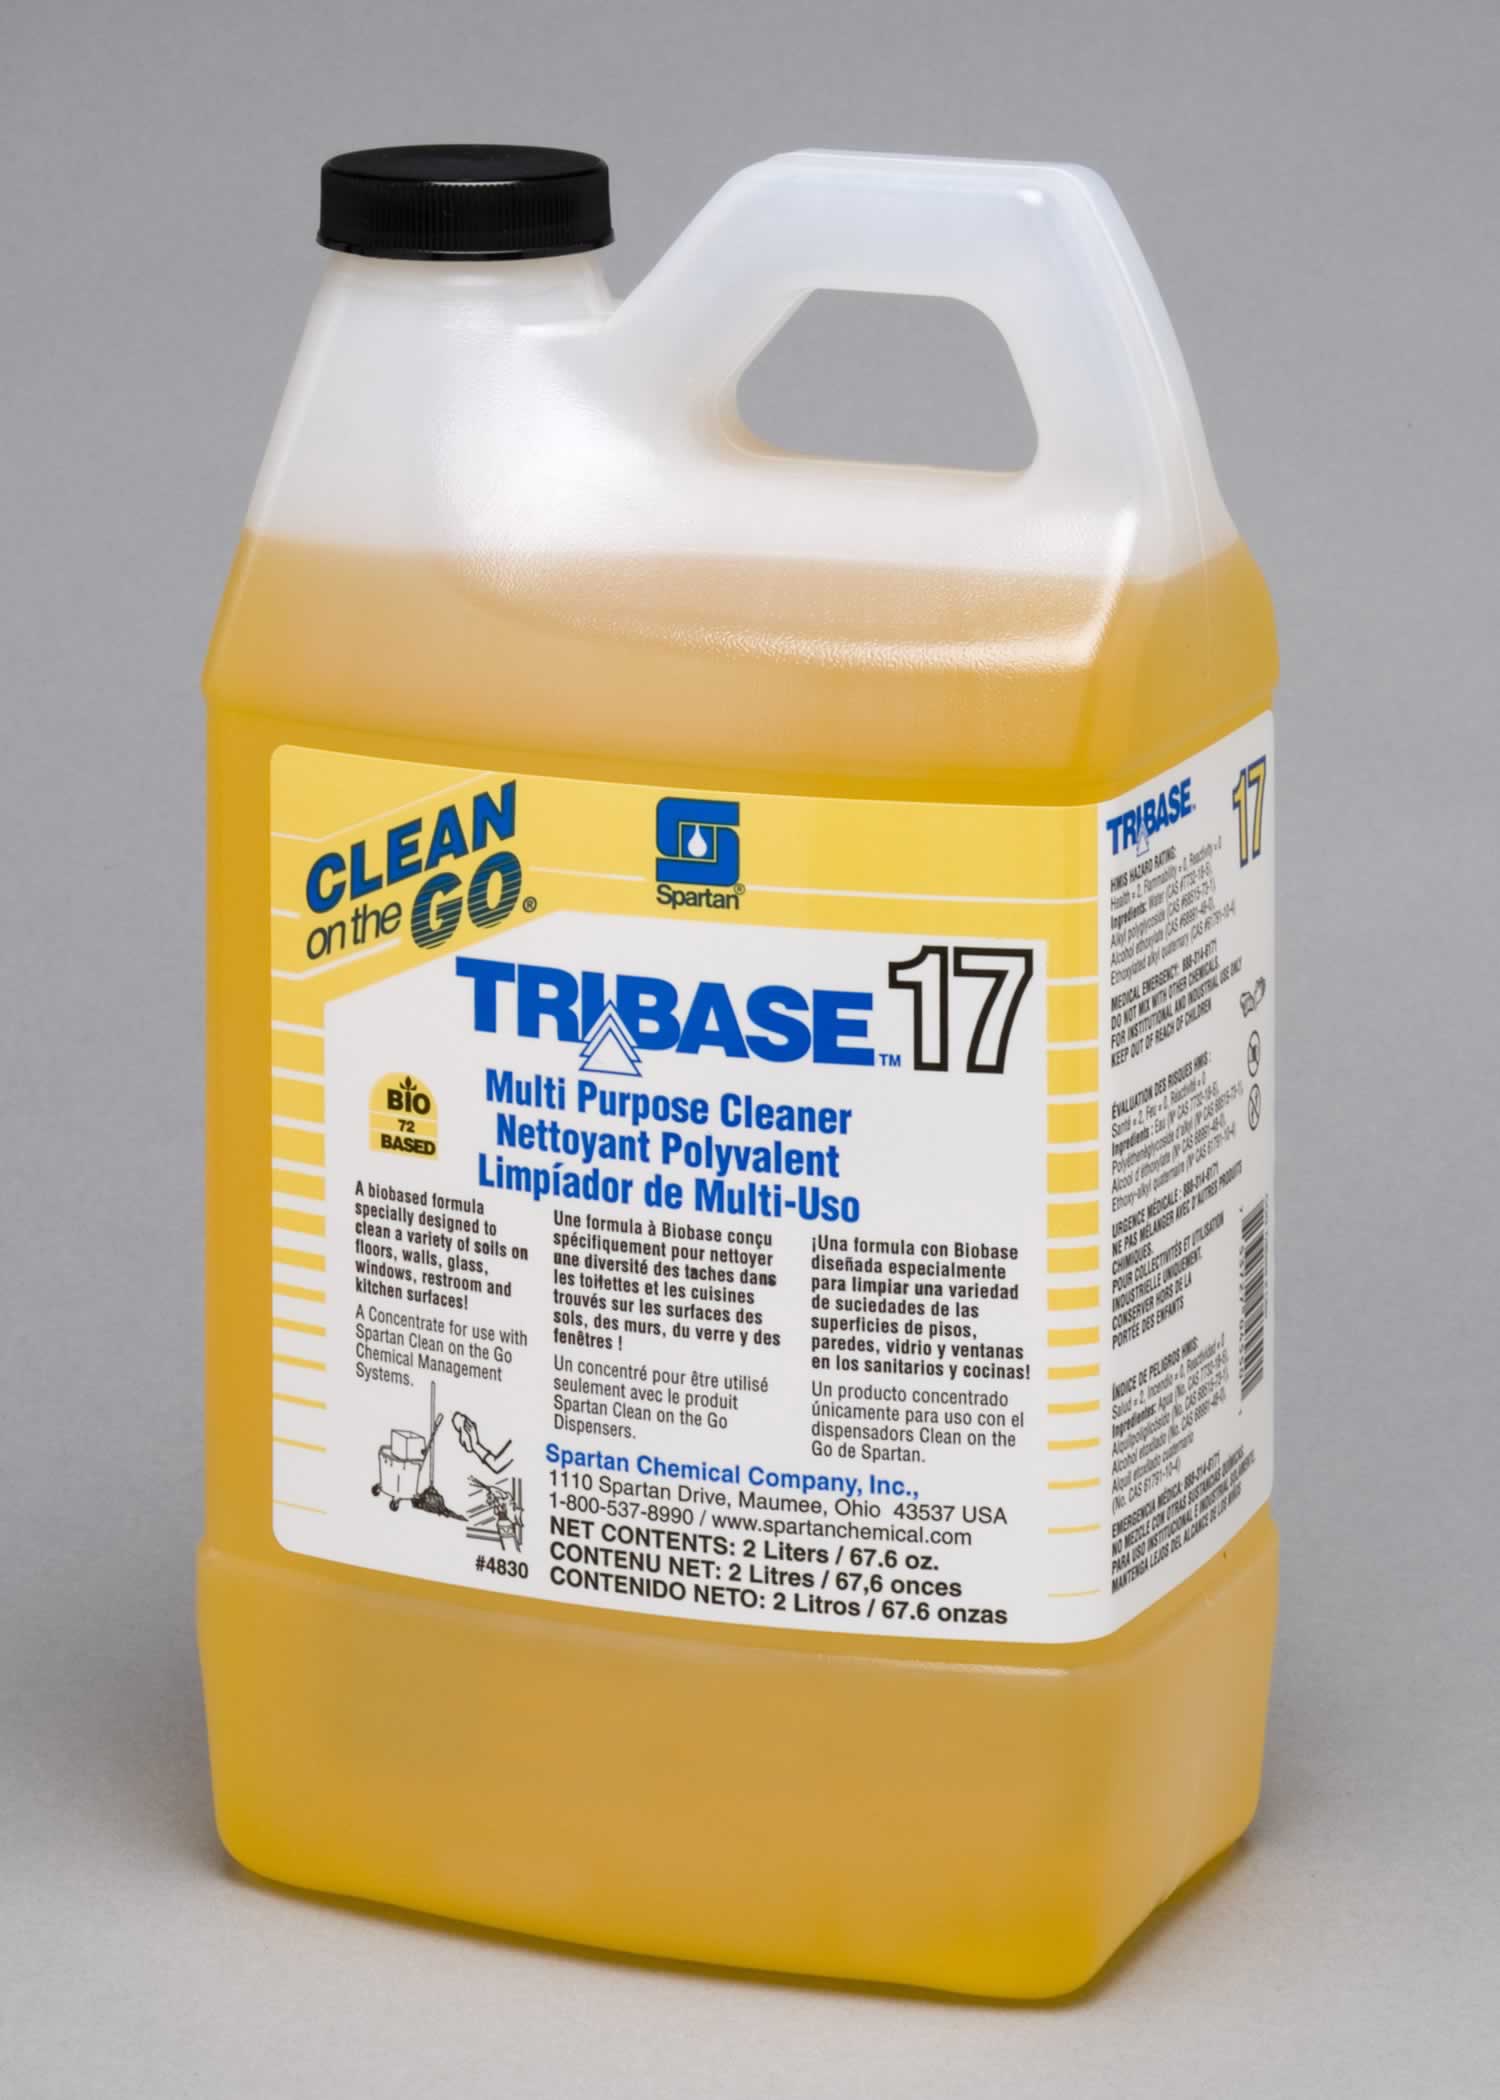 TriBase bio-based multi-purpose cleaner concentrate derived from coconut and palm kernel